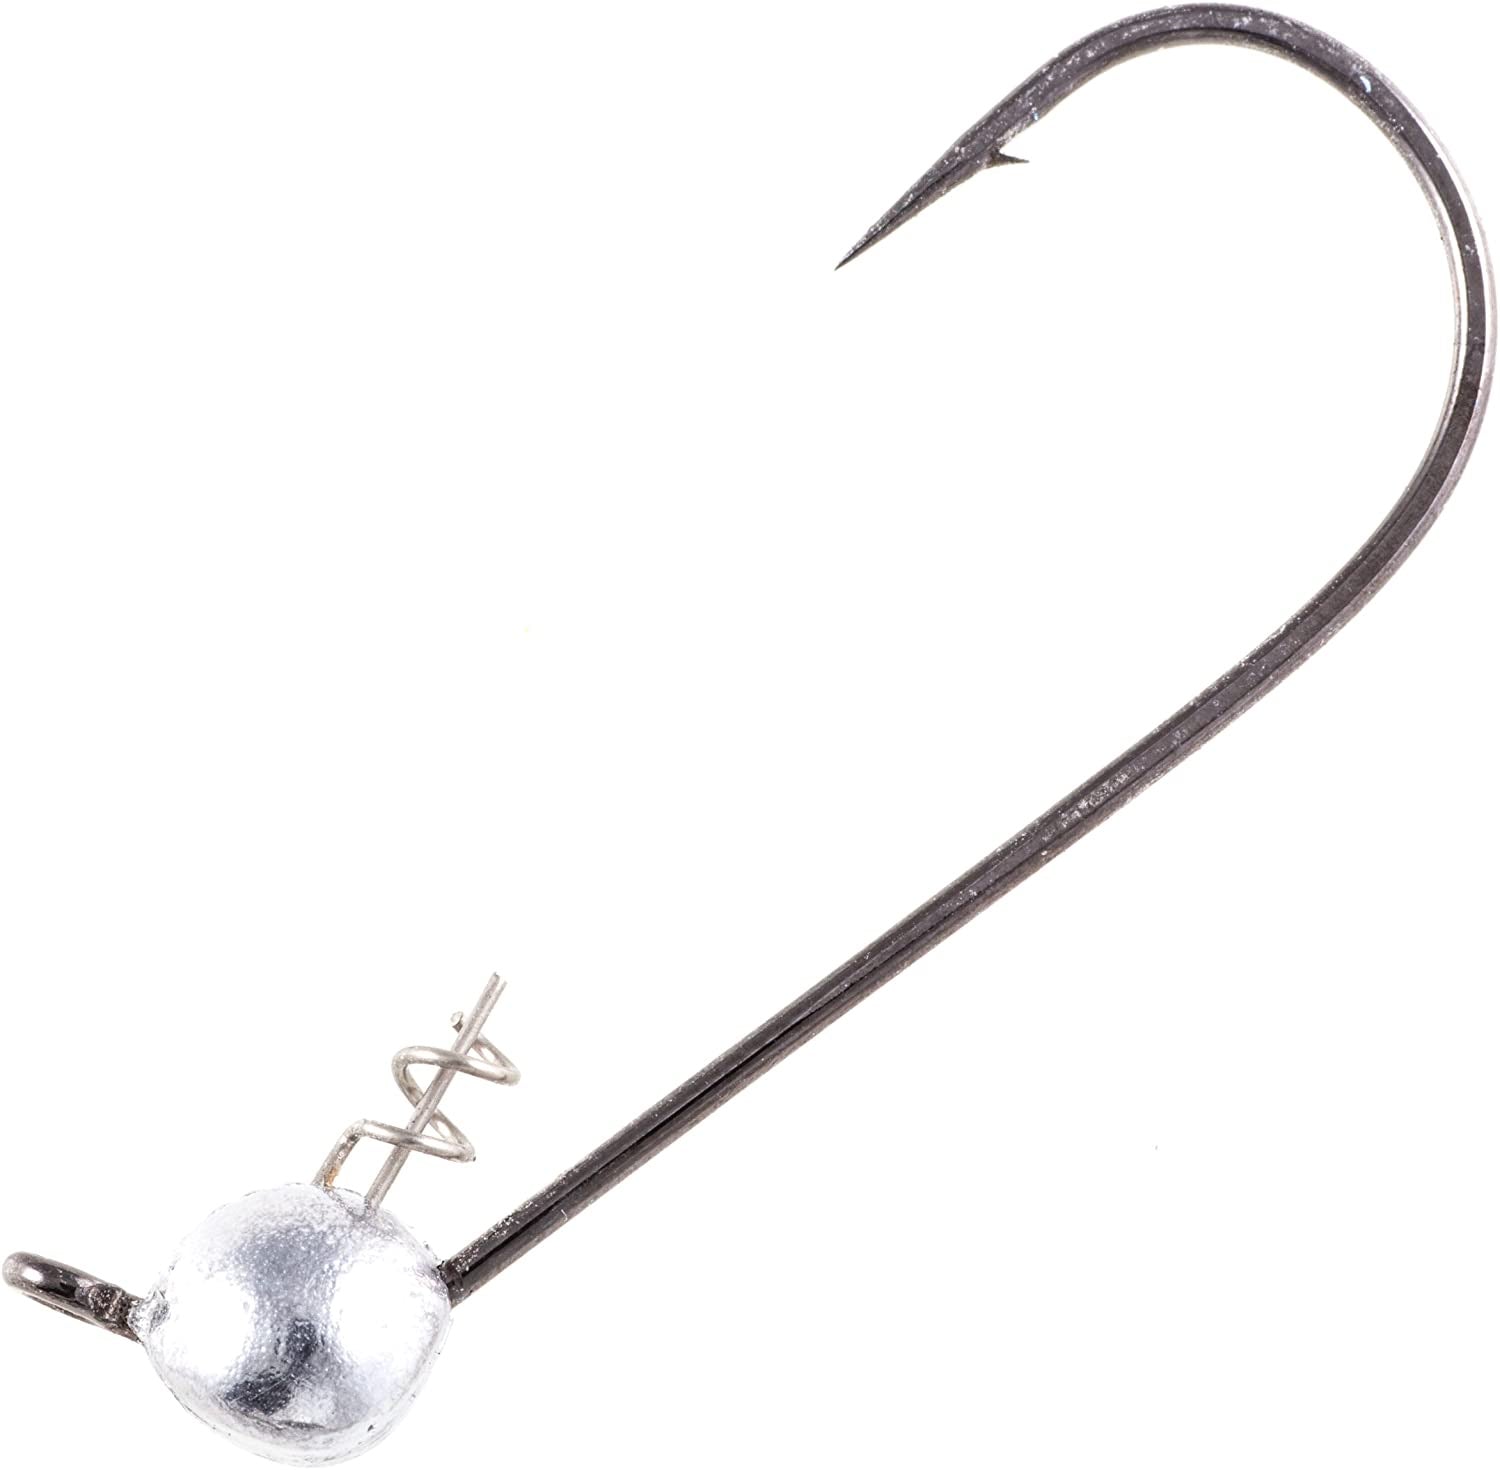 Owner Ultra Head Shaky Type 5151 - Dogfish Tackle & Marine